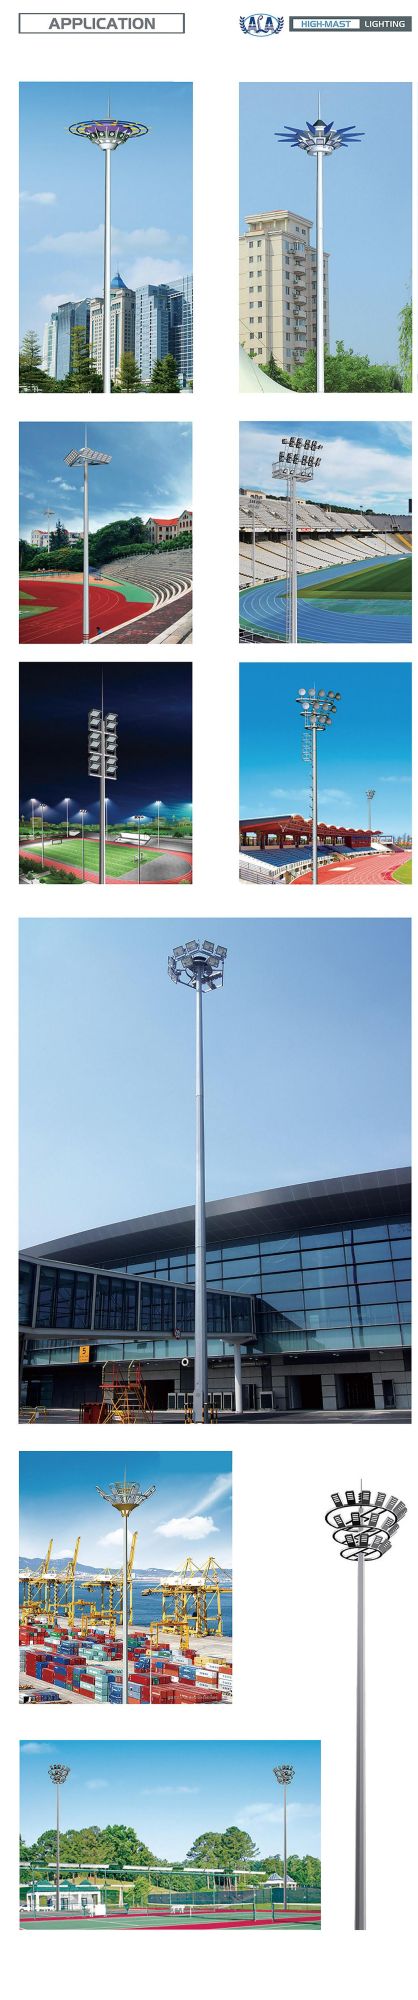 Ala 400W Airport Stadium High Mast Lamp with Raising and Lowering Device